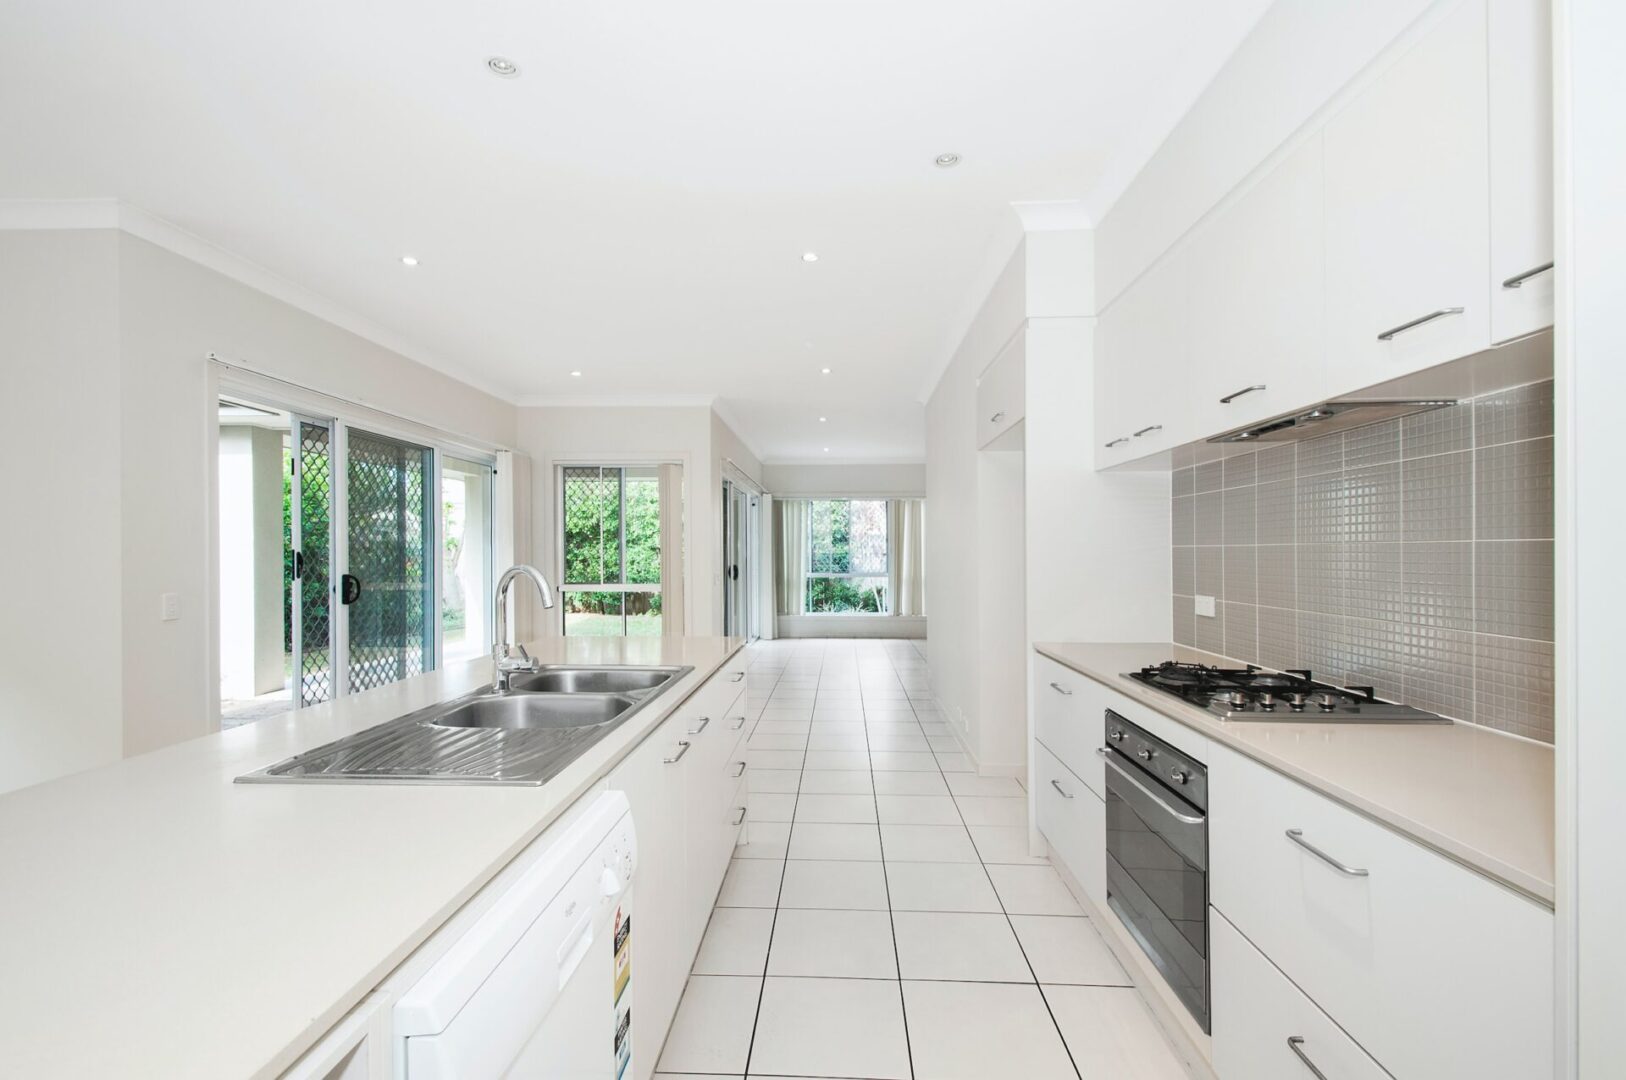 A kitchen with white cabinets and tiled floors